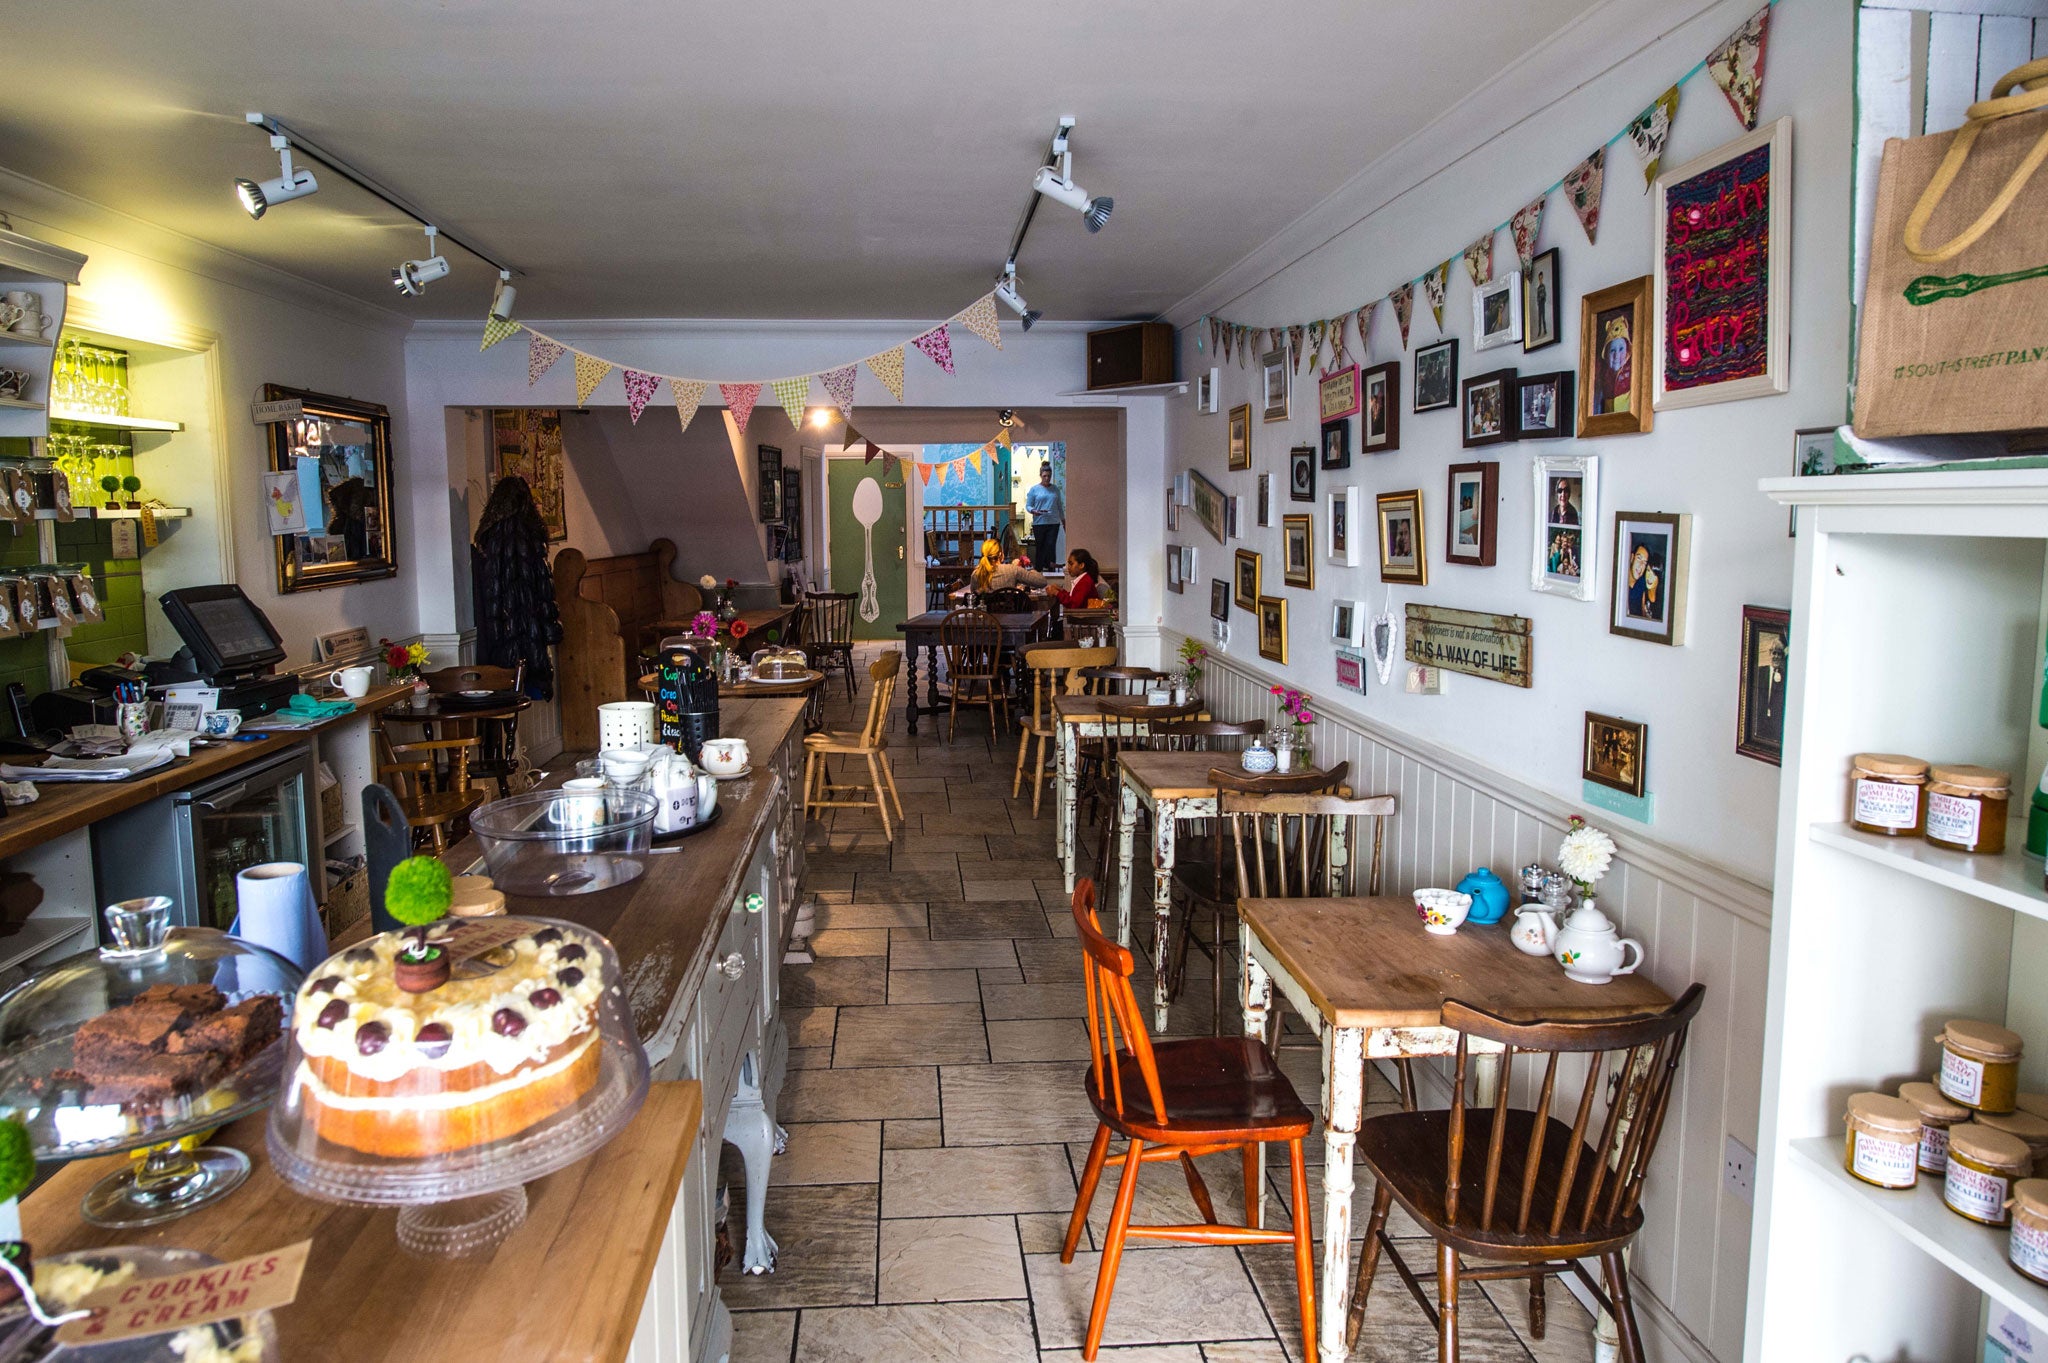 Jaunty: The South Street Pantry features mismatched furniture and a counter laden with cakes